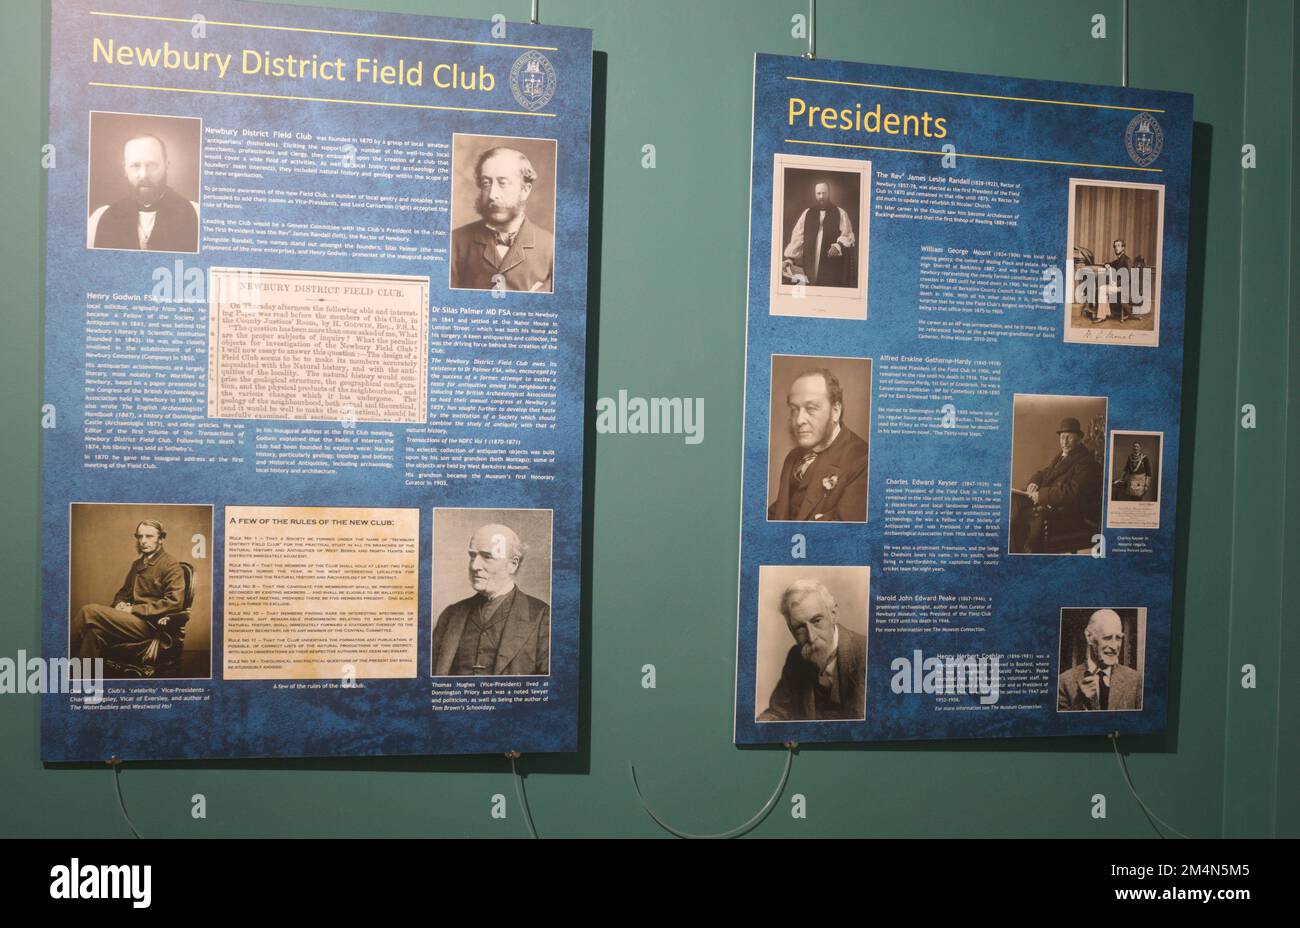 Newbury District Field club and its presidents display at West Berkshire museum Stock Photo